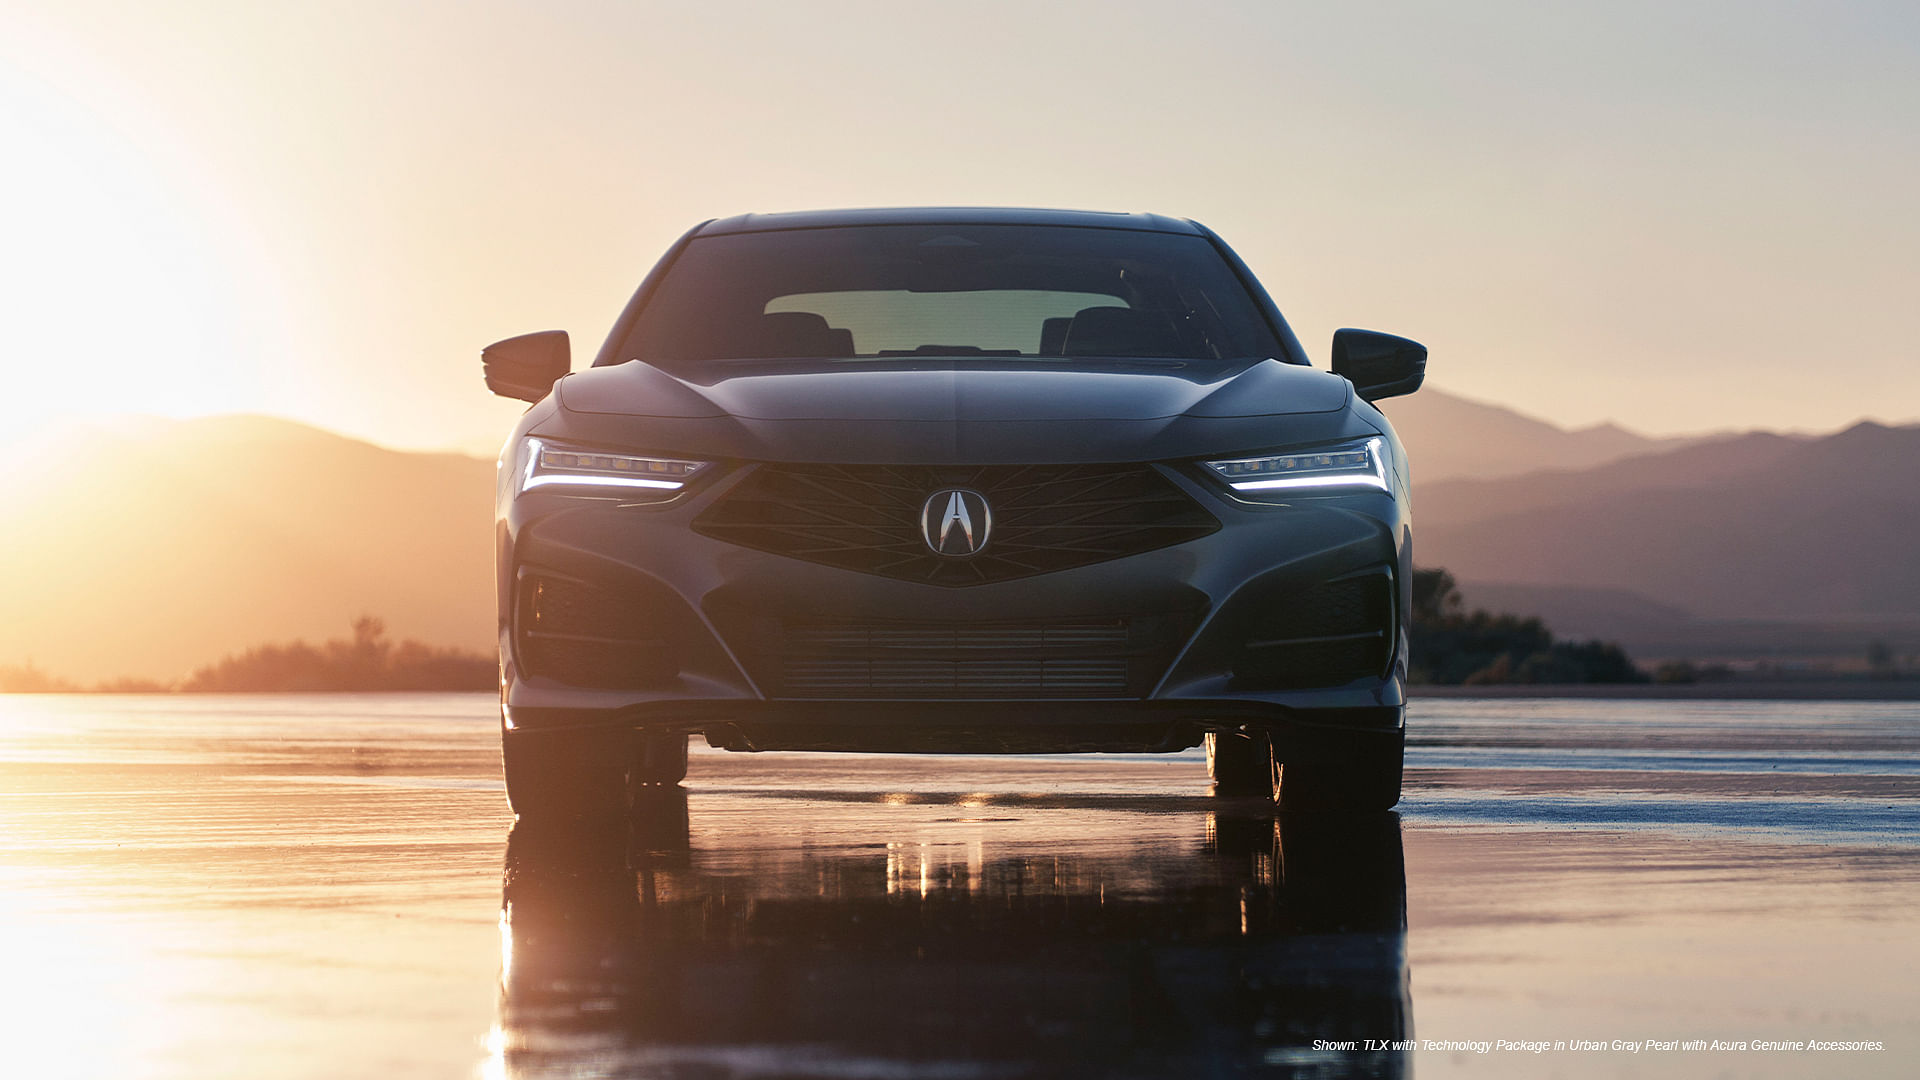 Acura TLX front view